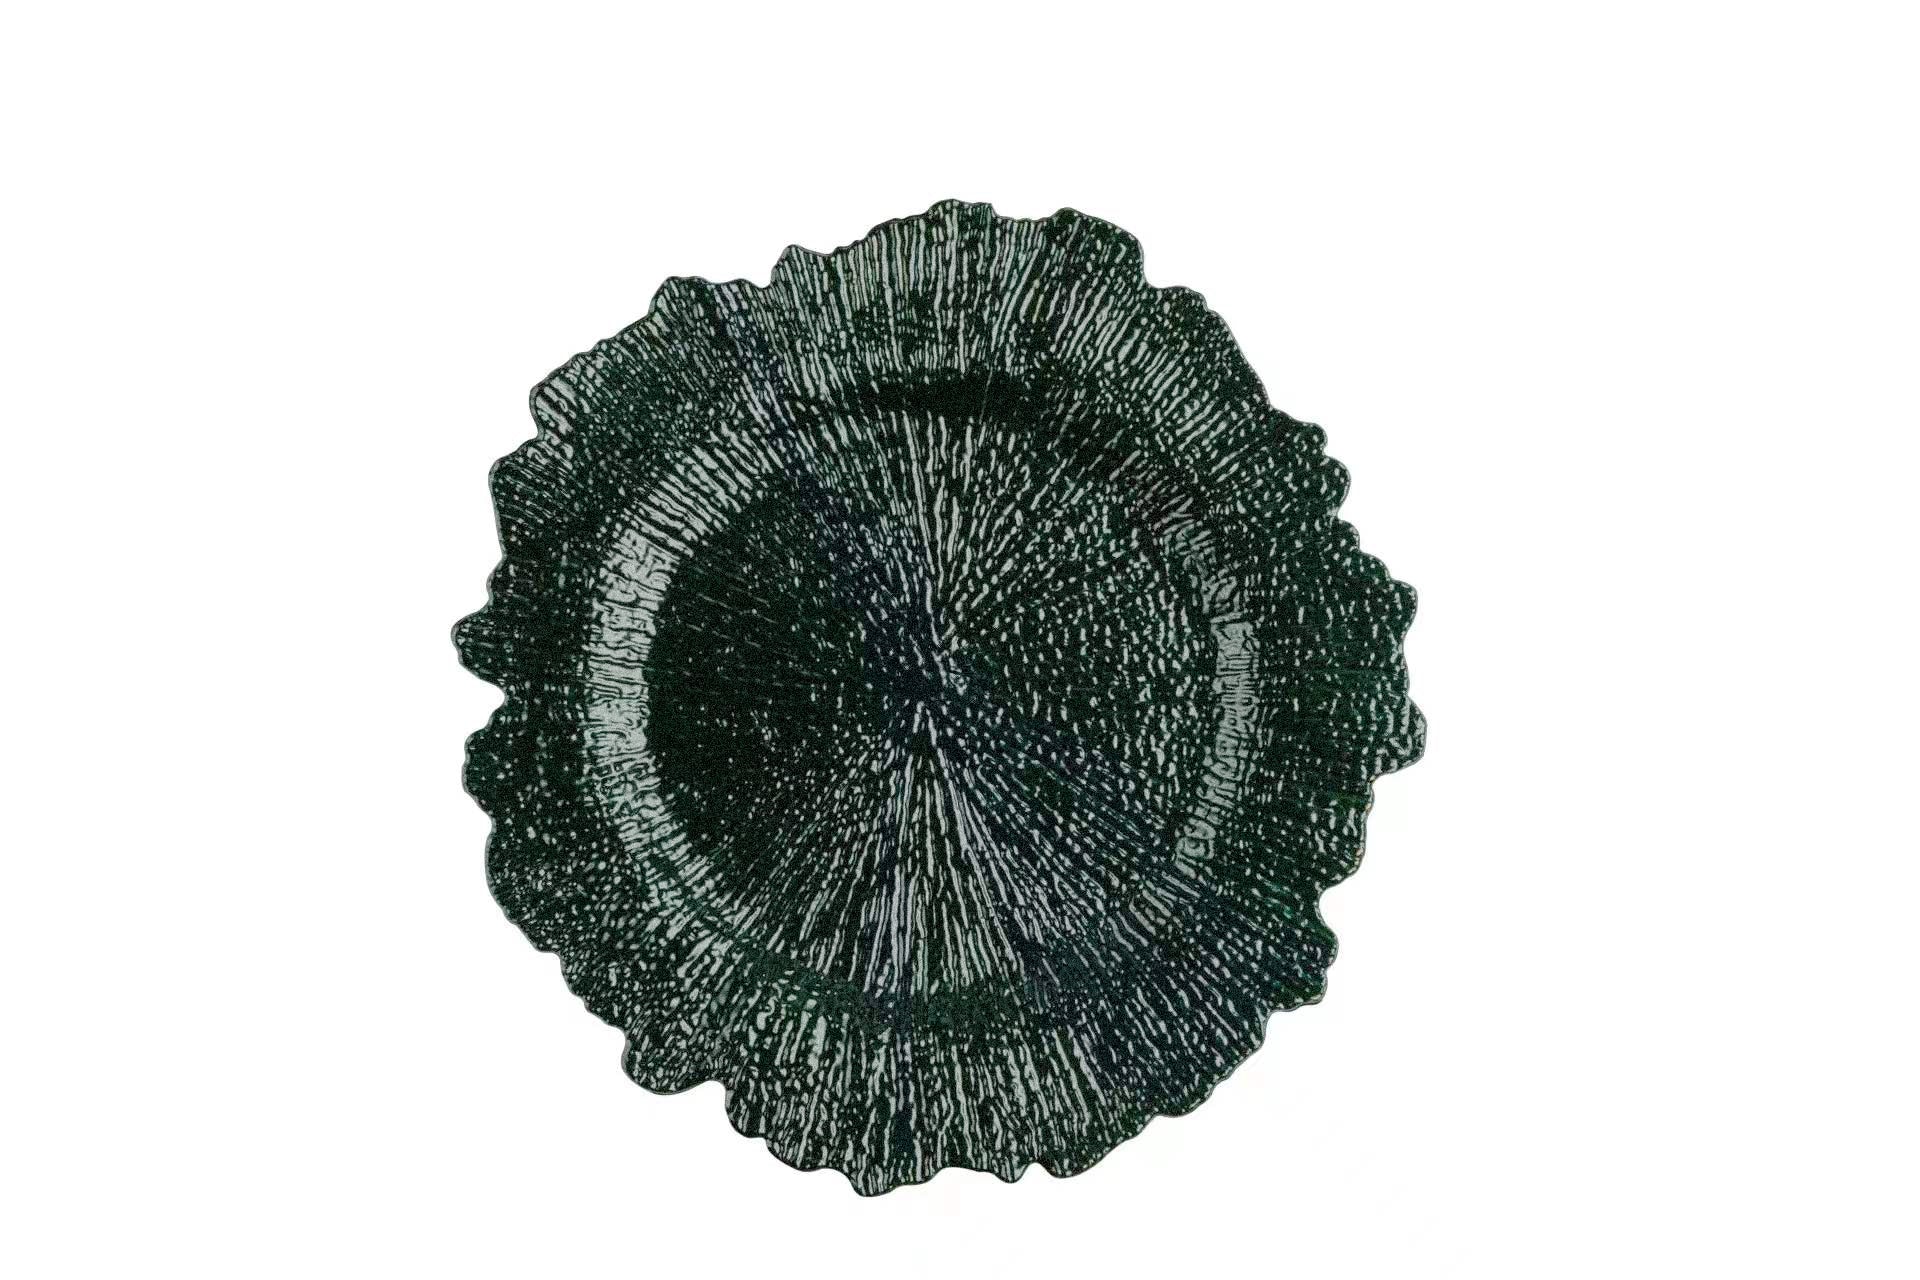 Reef Acrylic Plastic Charger Plate - Emerald Green